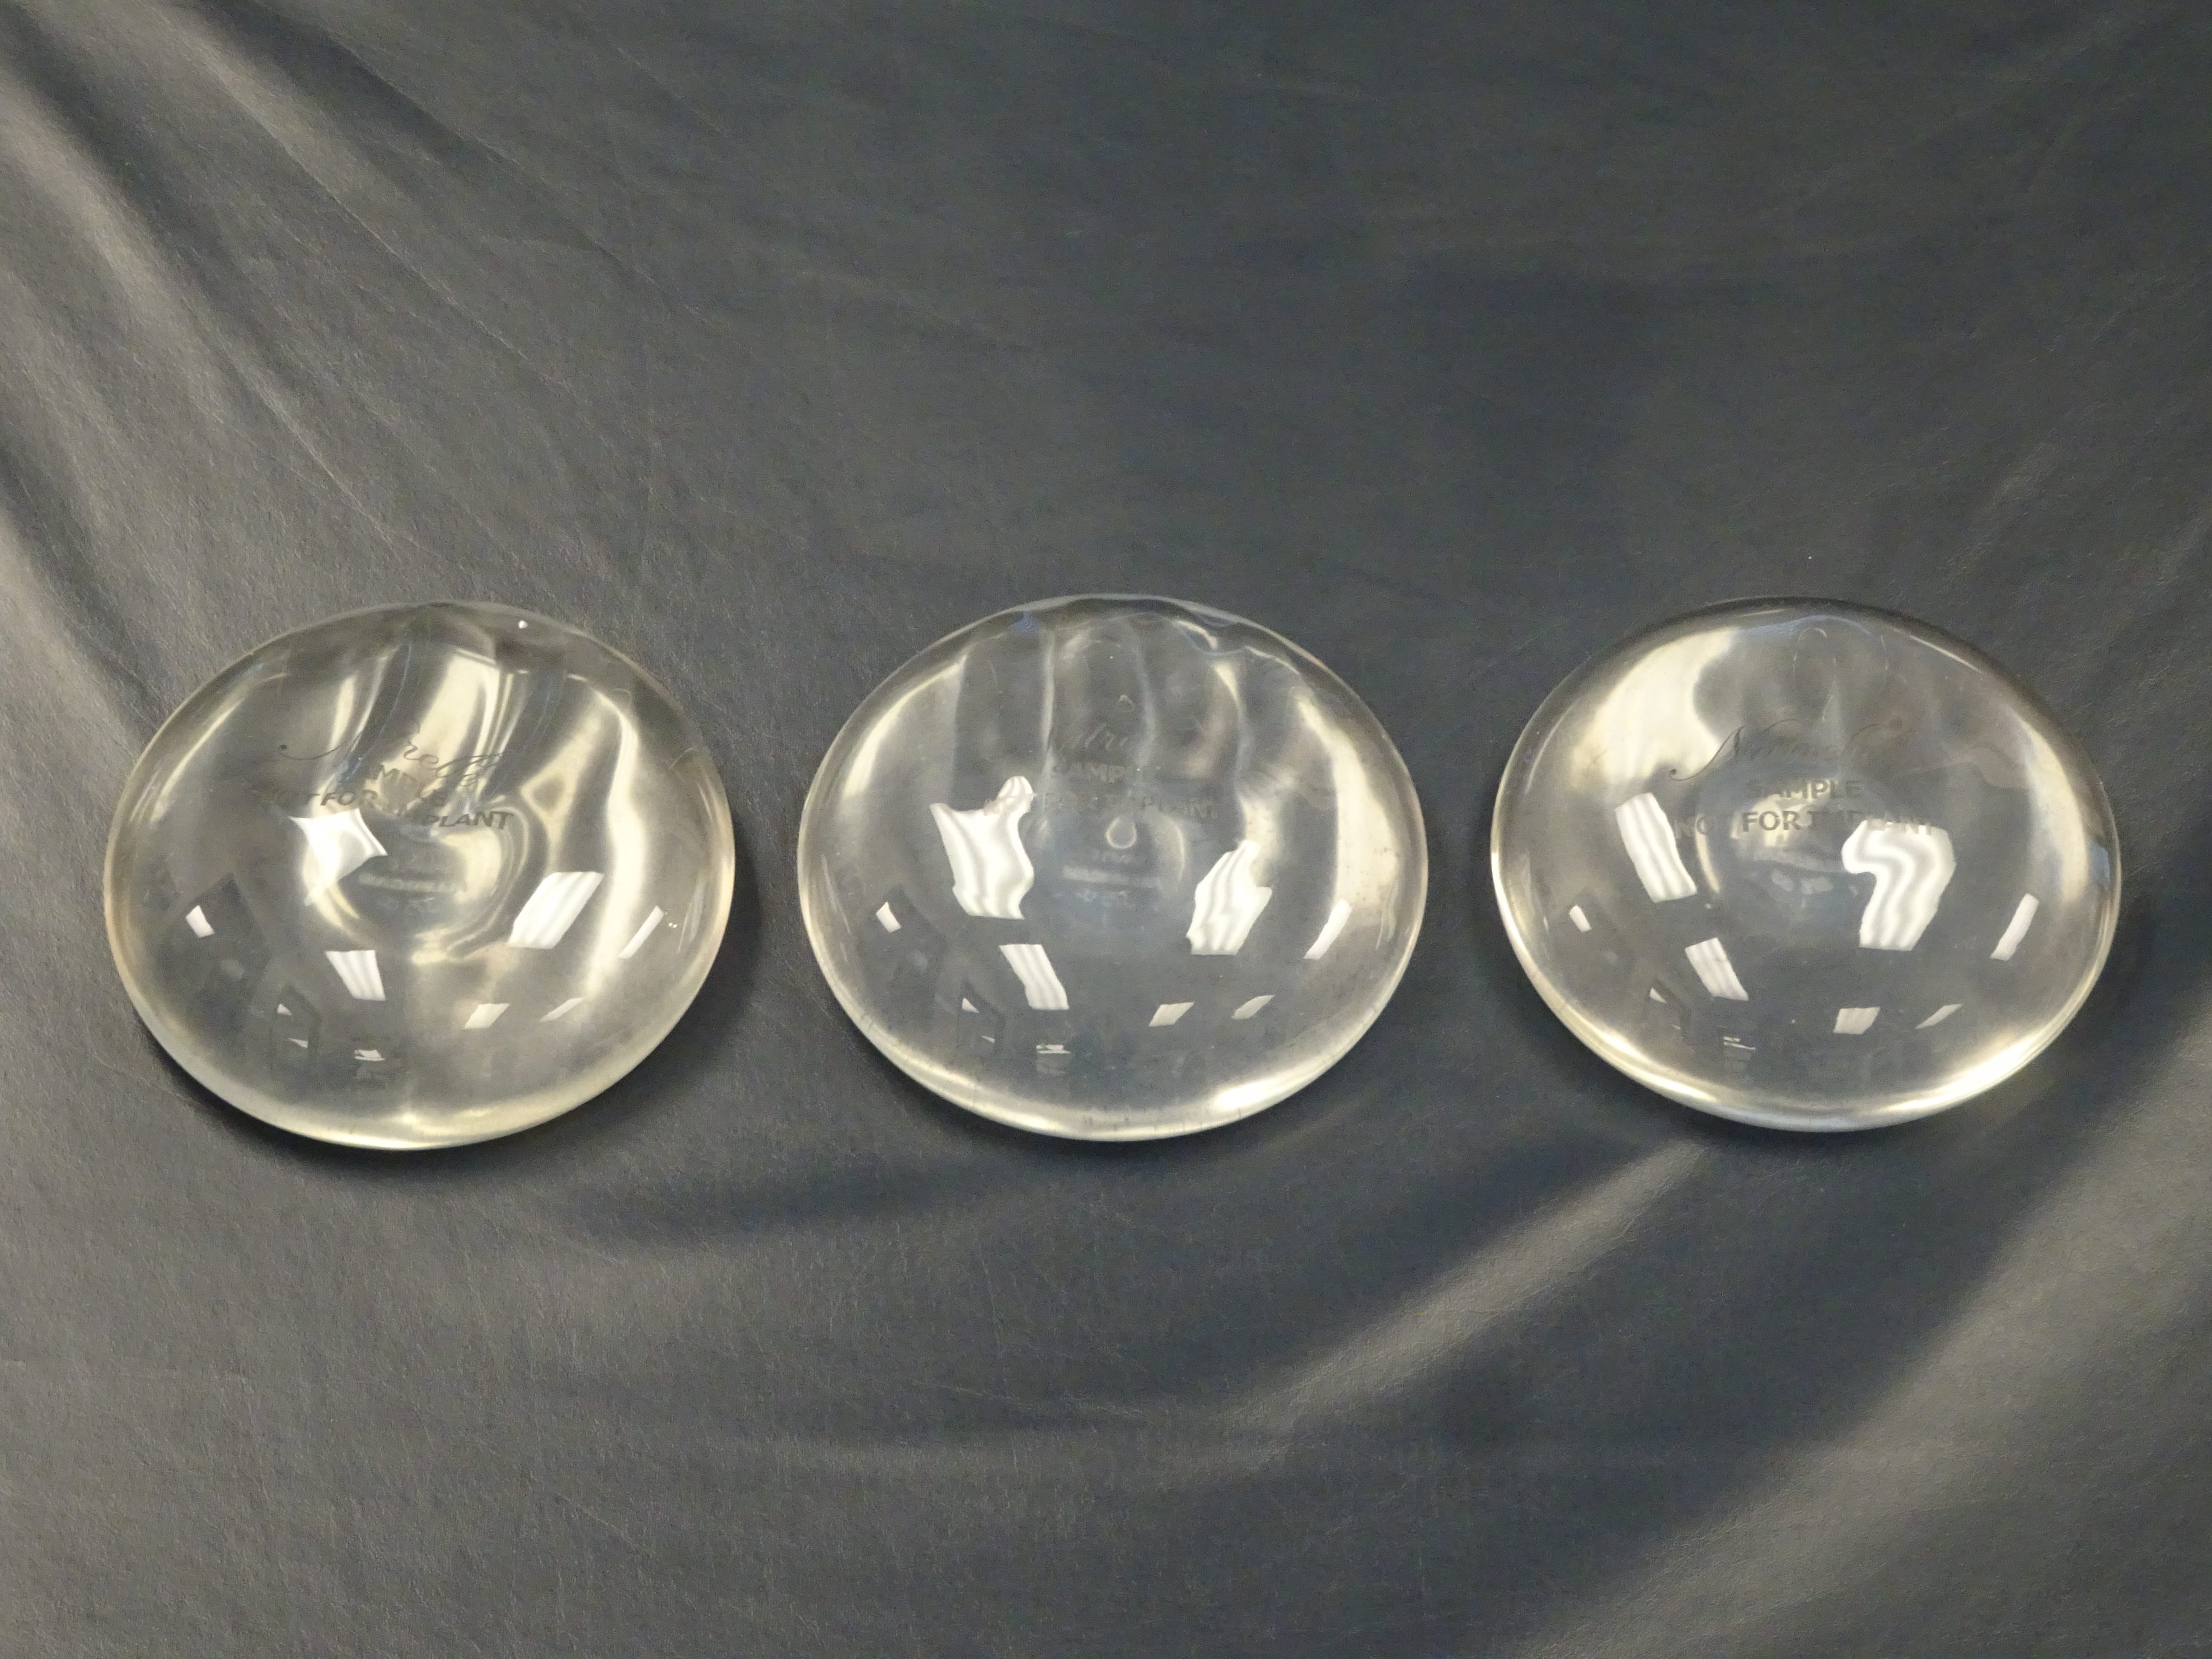 Breast Implants in Palm Beach at Ennis Plastic Surgery